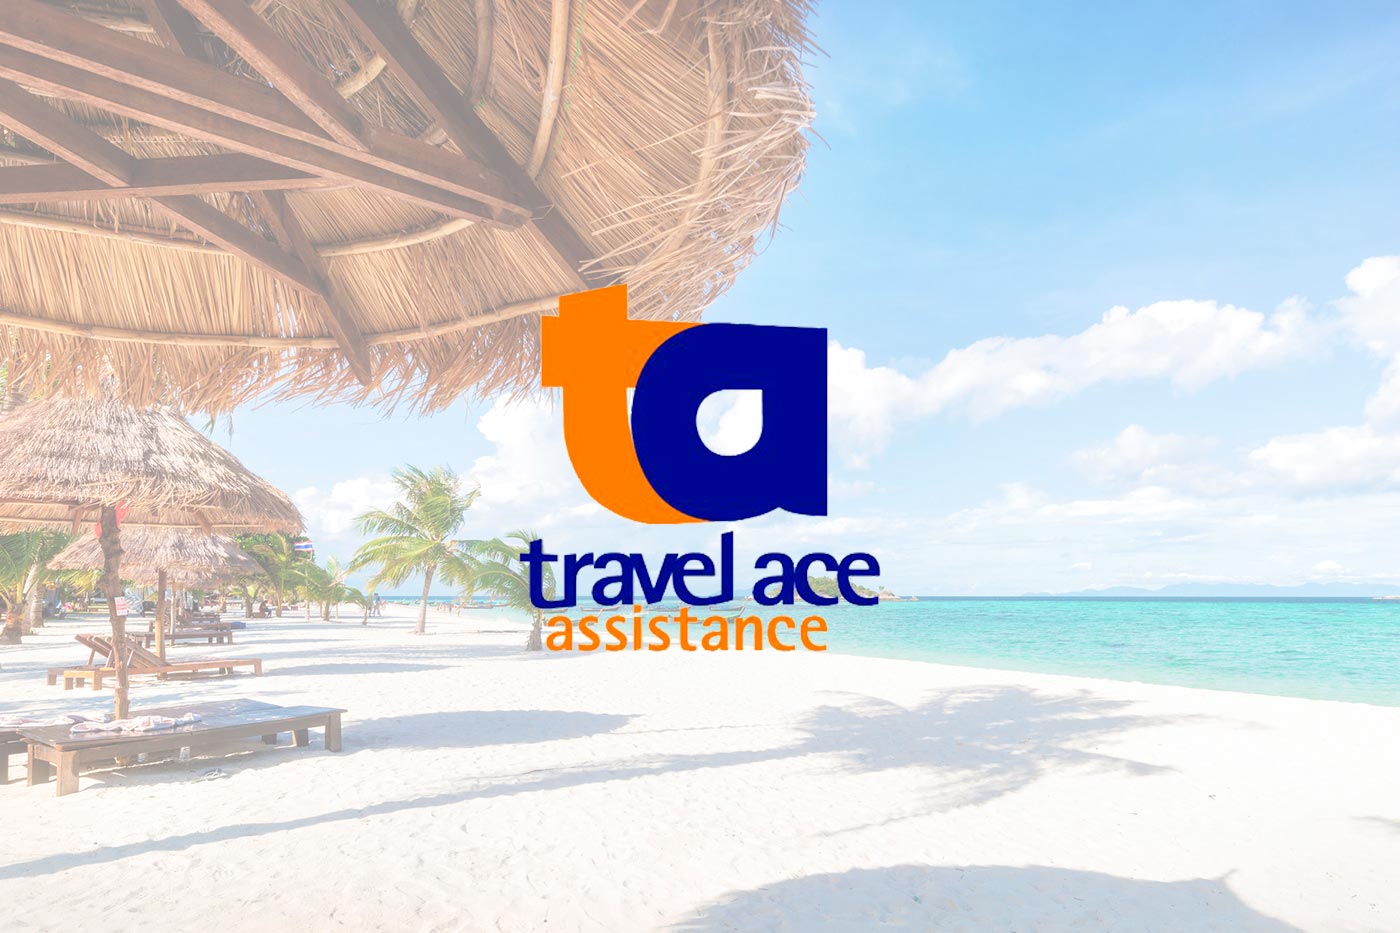 travel ace universal assistance